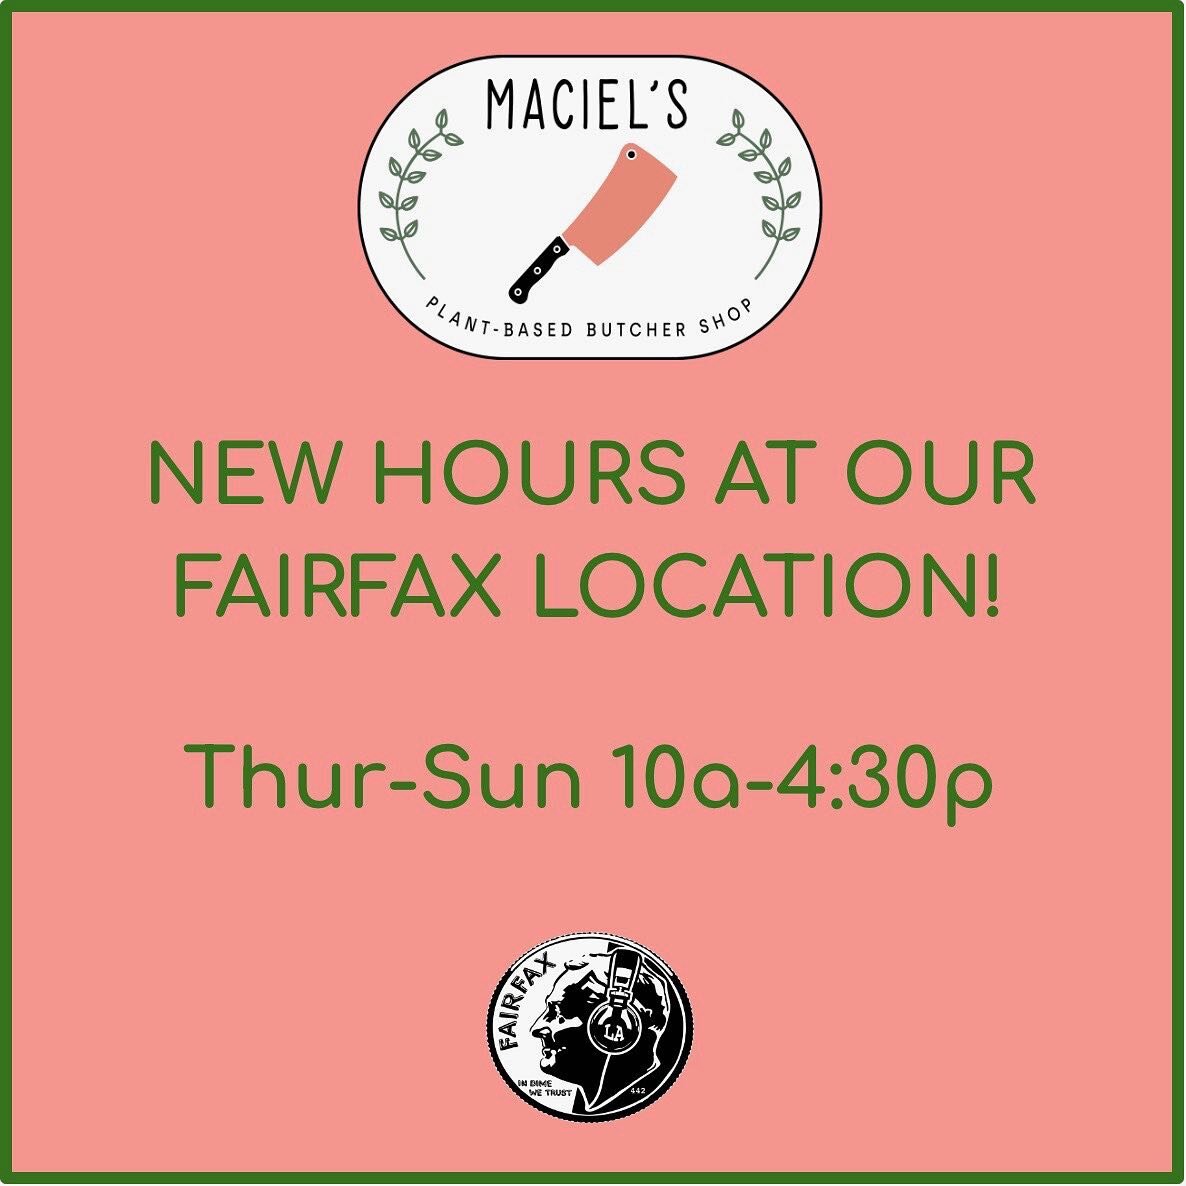 We are learning the rhythms of Fairfax and adjusting our hours 🌞  Come see us at The Dime on Thursdays-Sundays 10a-4:30p - dine-in, take-out, or delivery! 

#plantbased #vegan #plantbasedmeats #plantbasedbutcher #veganmeats #deli #veganbutcher #vega